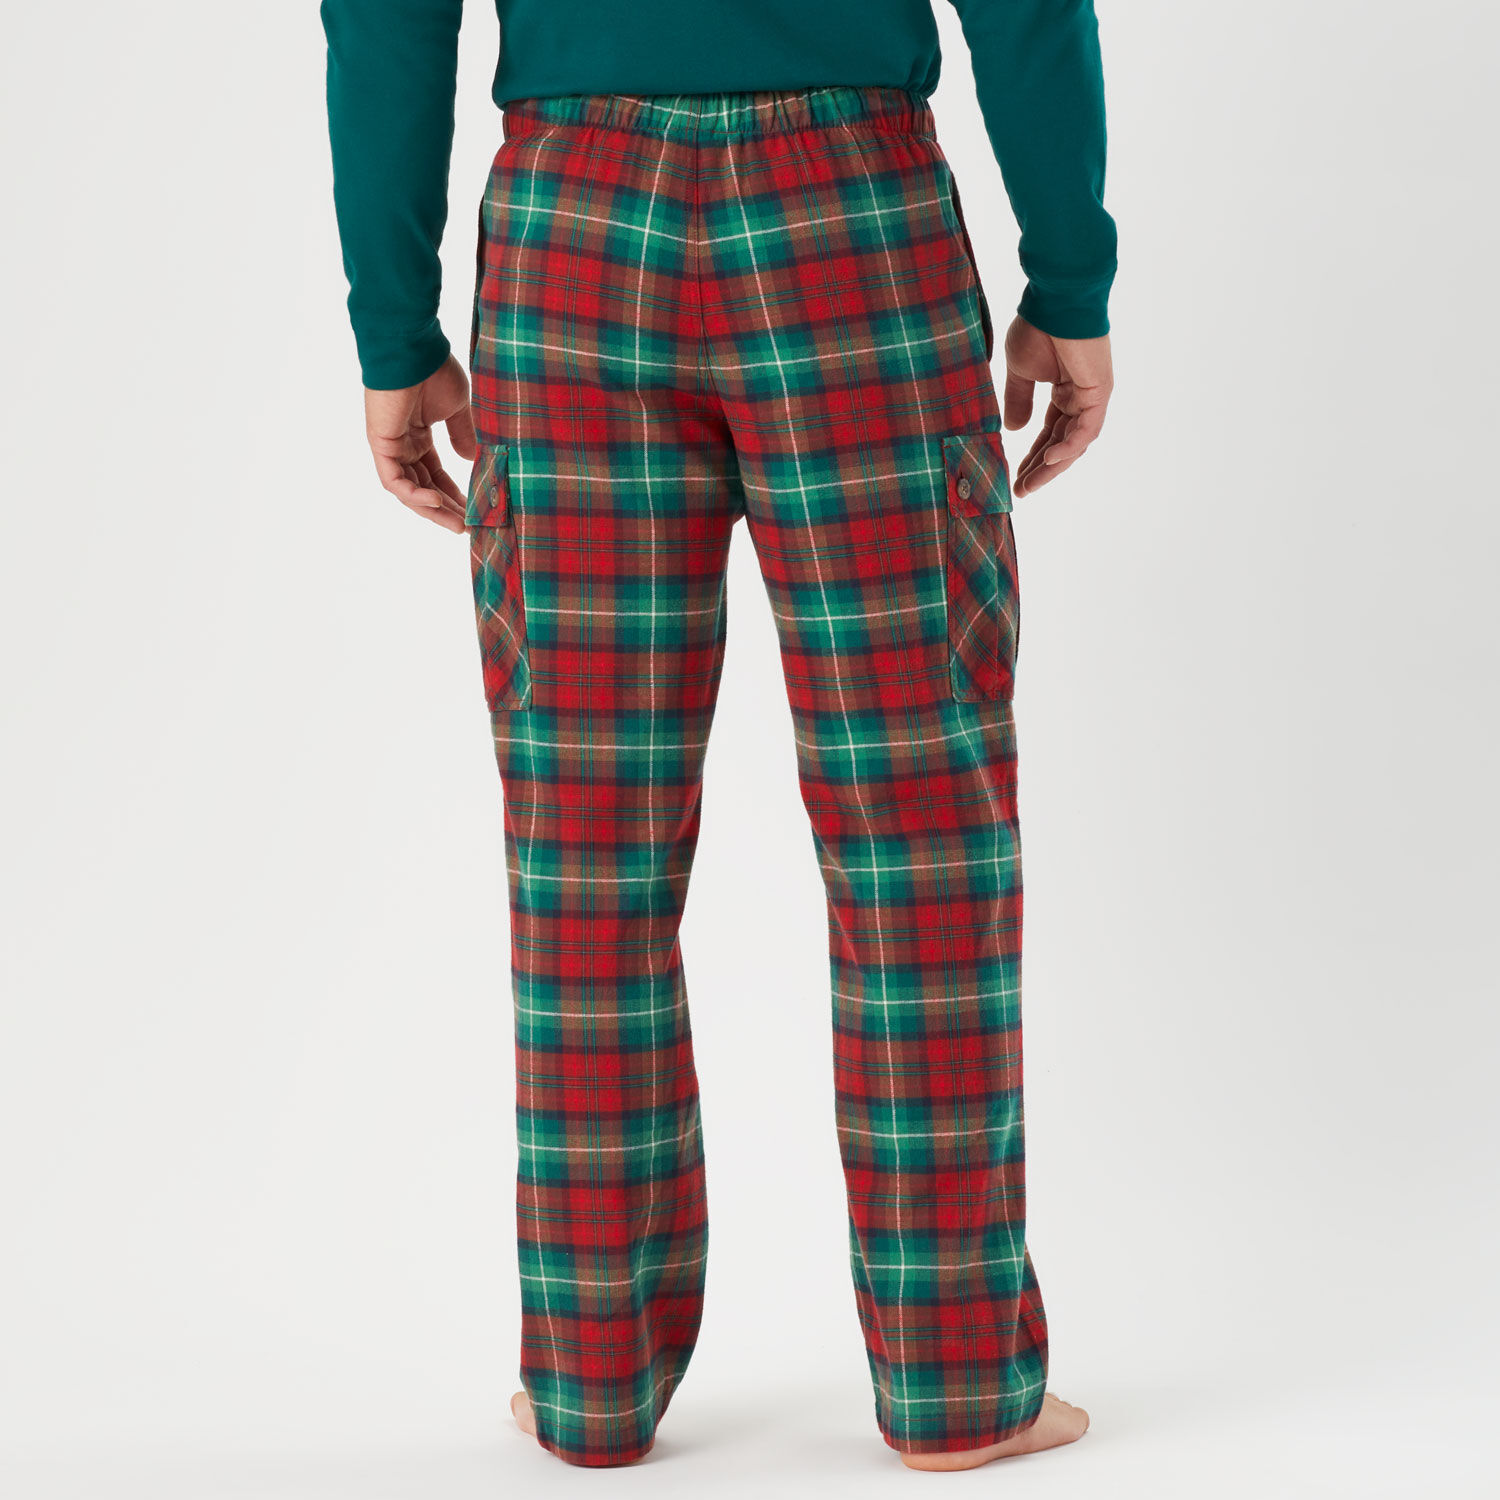 Why Flannel Makes For Exceptional Trousers – Rampley and Co